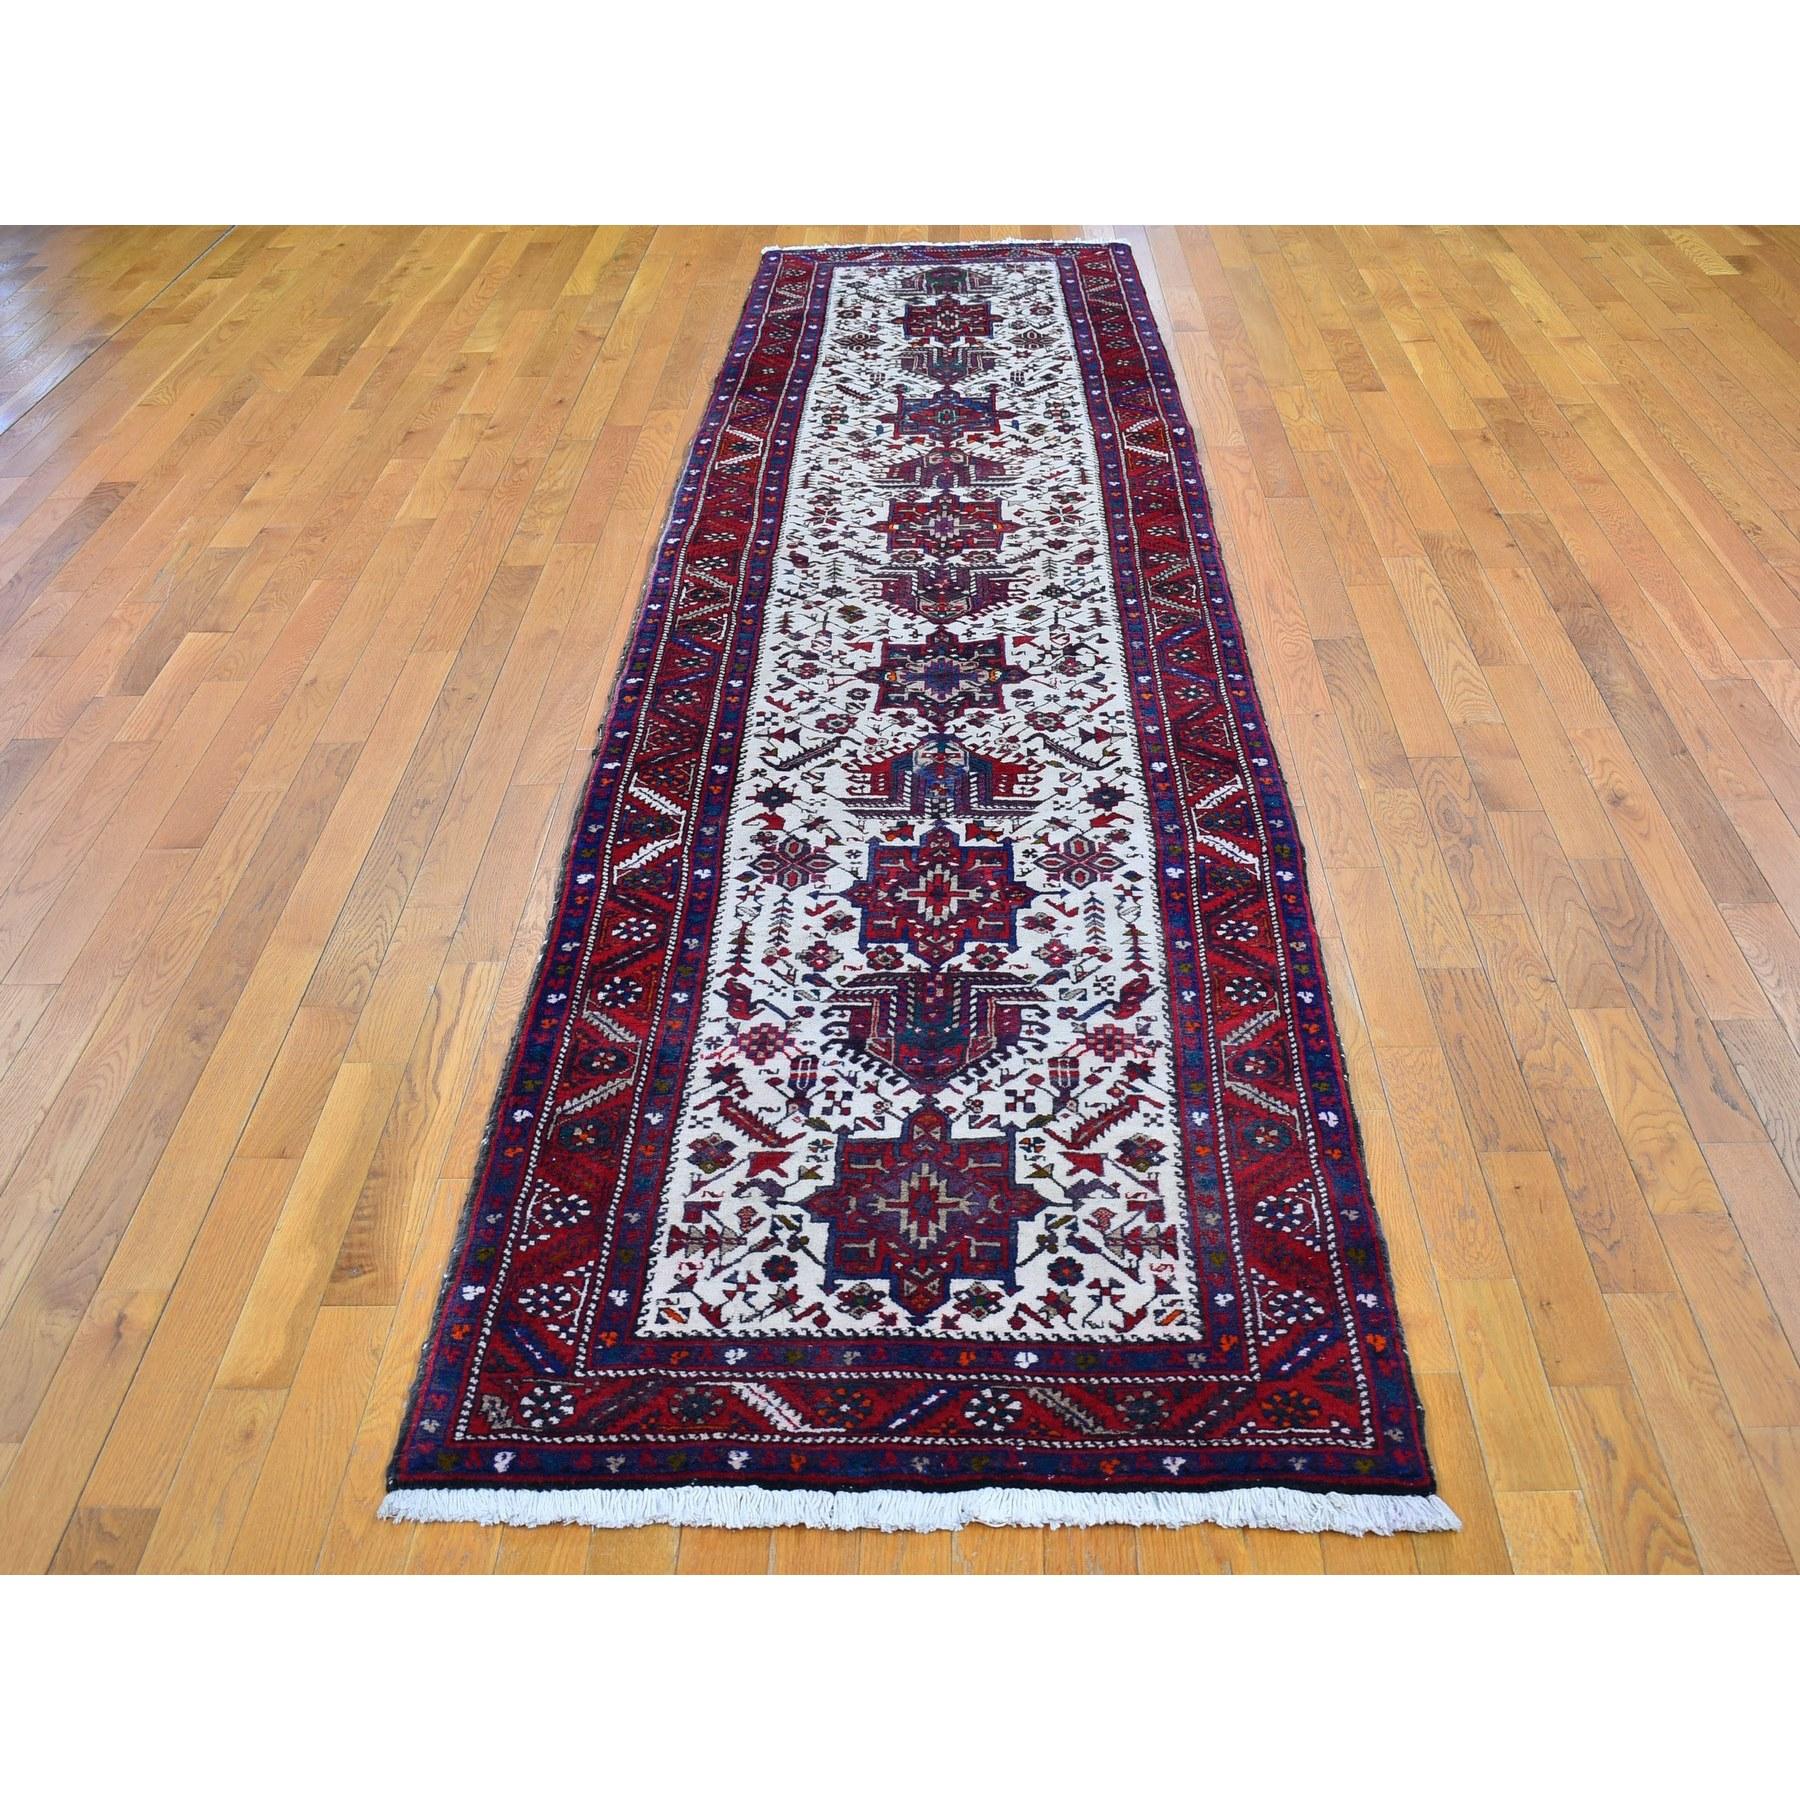 This fabulous hand-knotted carpet has been created and designed for extra strength and durability. This rug has been handcrafted for weeks in the traditional method that is used to make
Exact rug size in feet and inches : 3'4